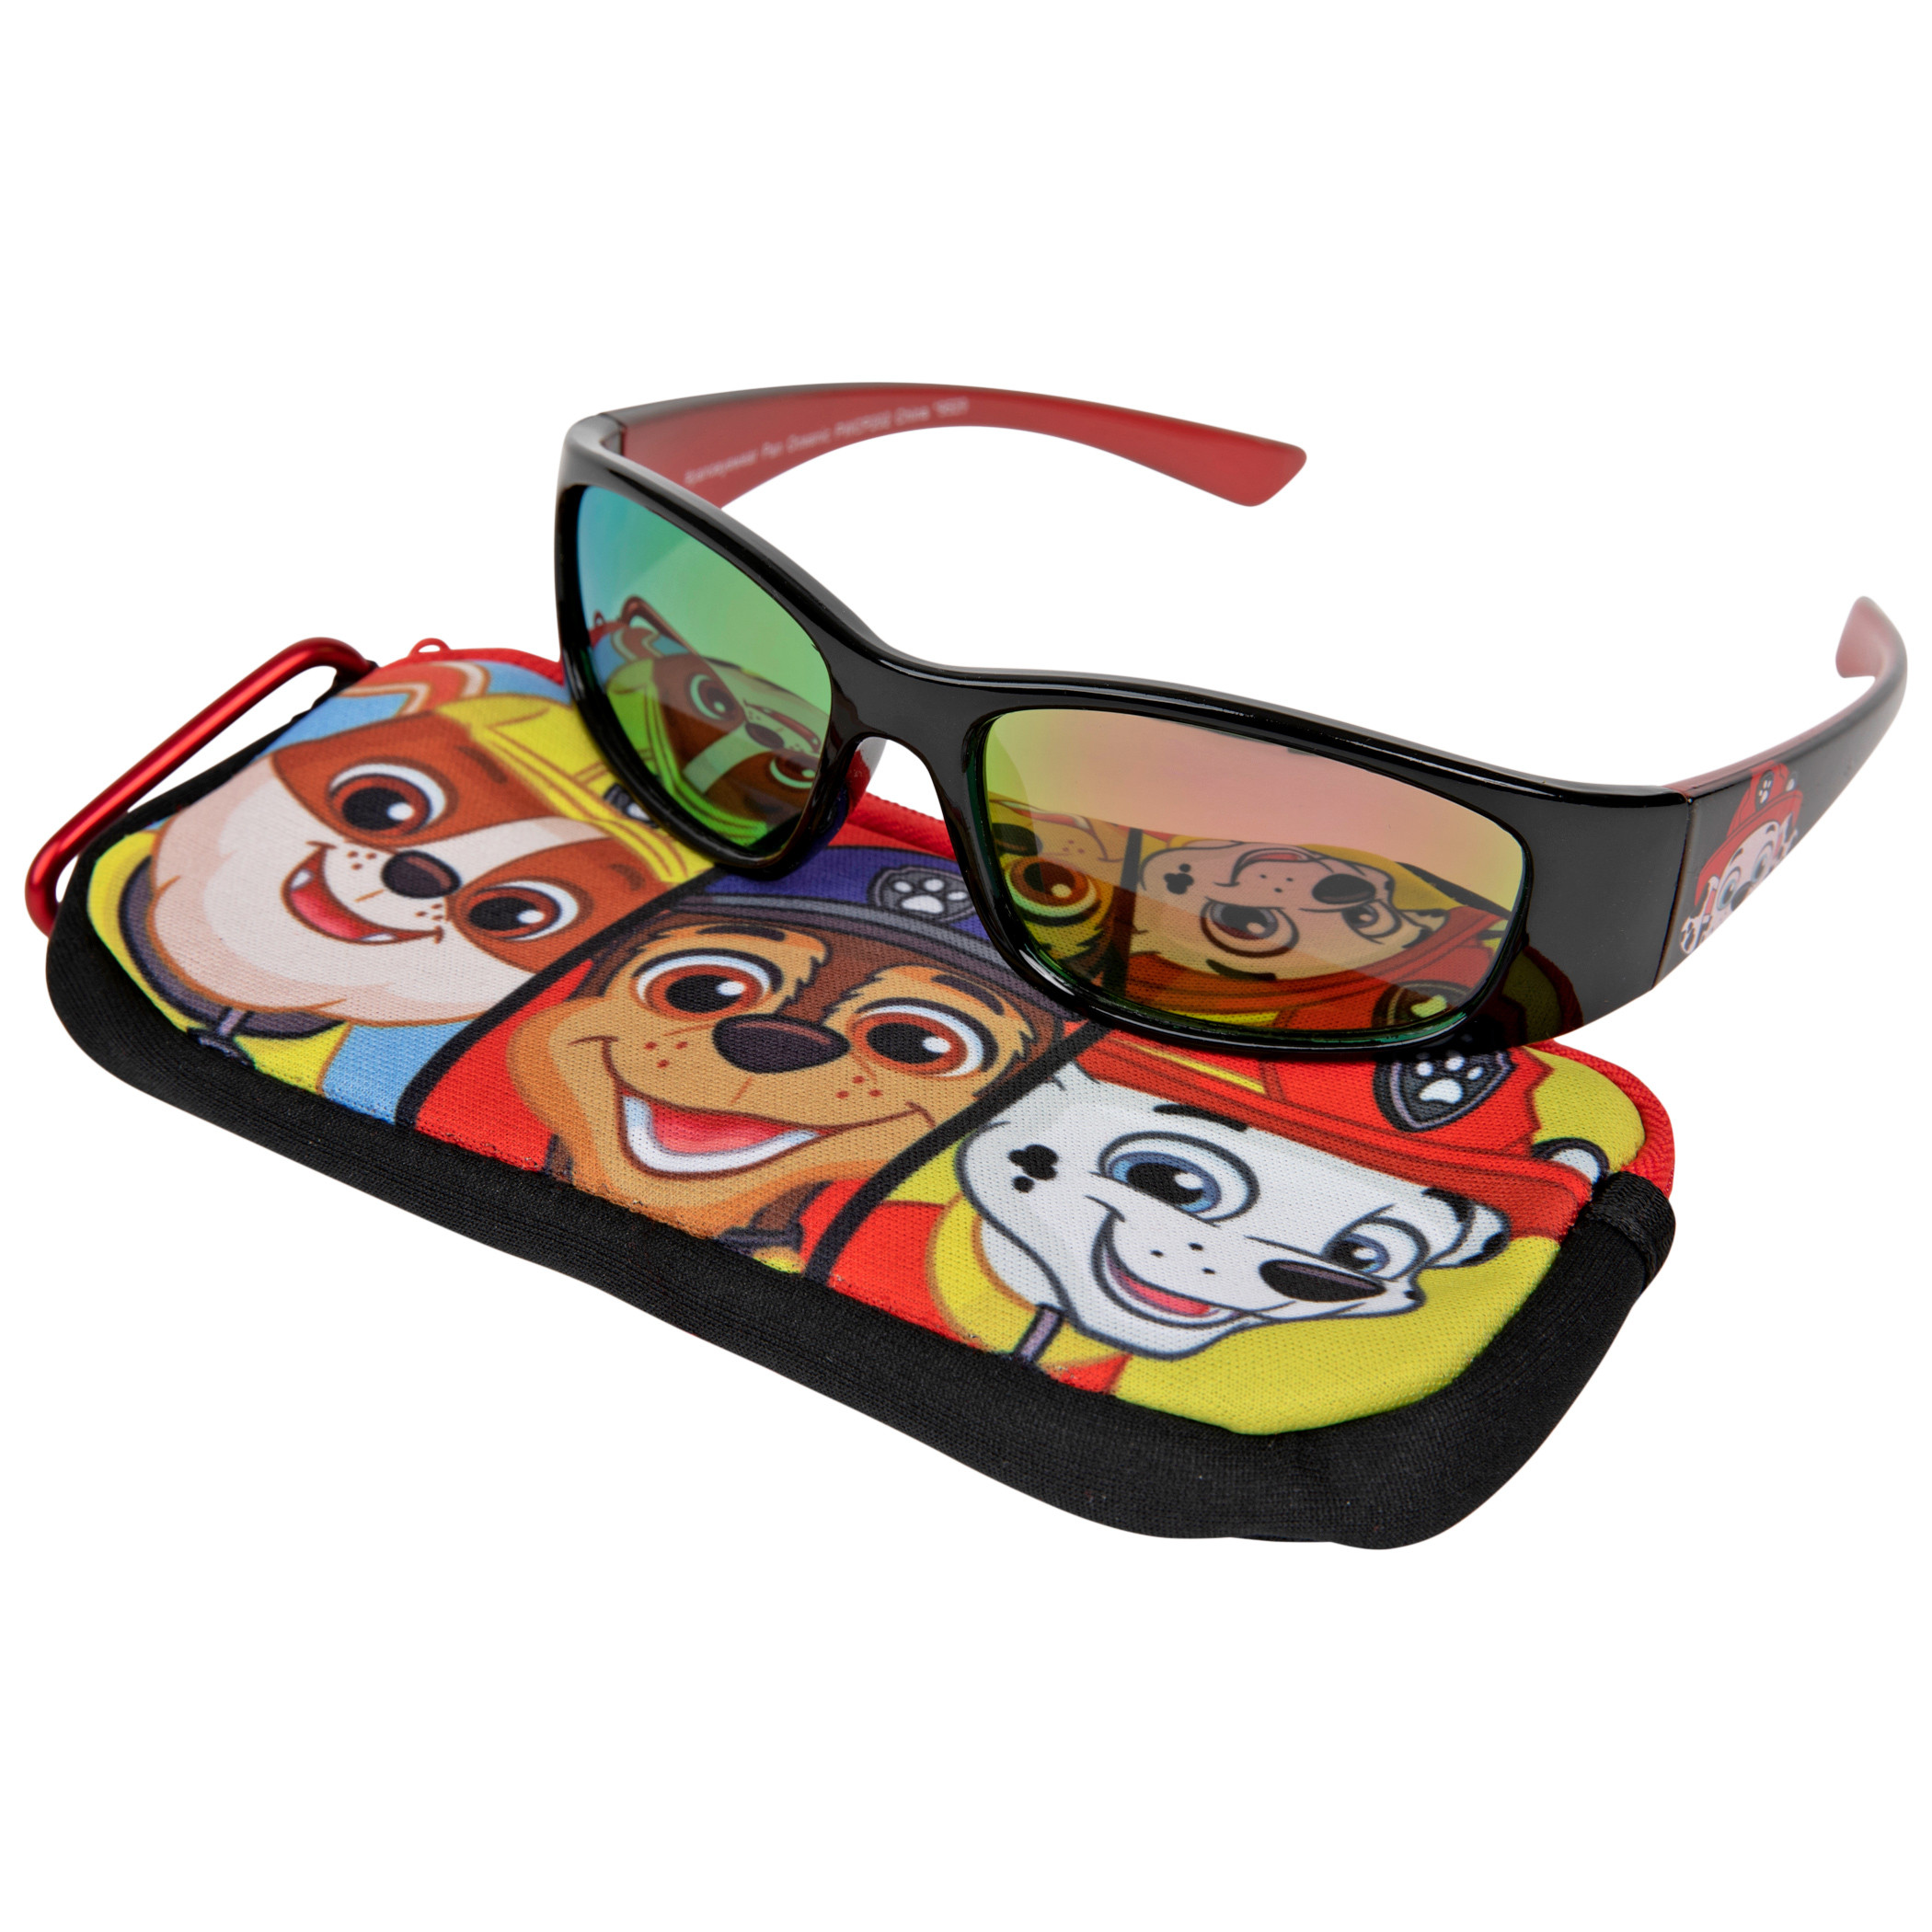 Nickelodeon Paw Patrol Character Squares Sunglasses w/ Carabiner Pouch